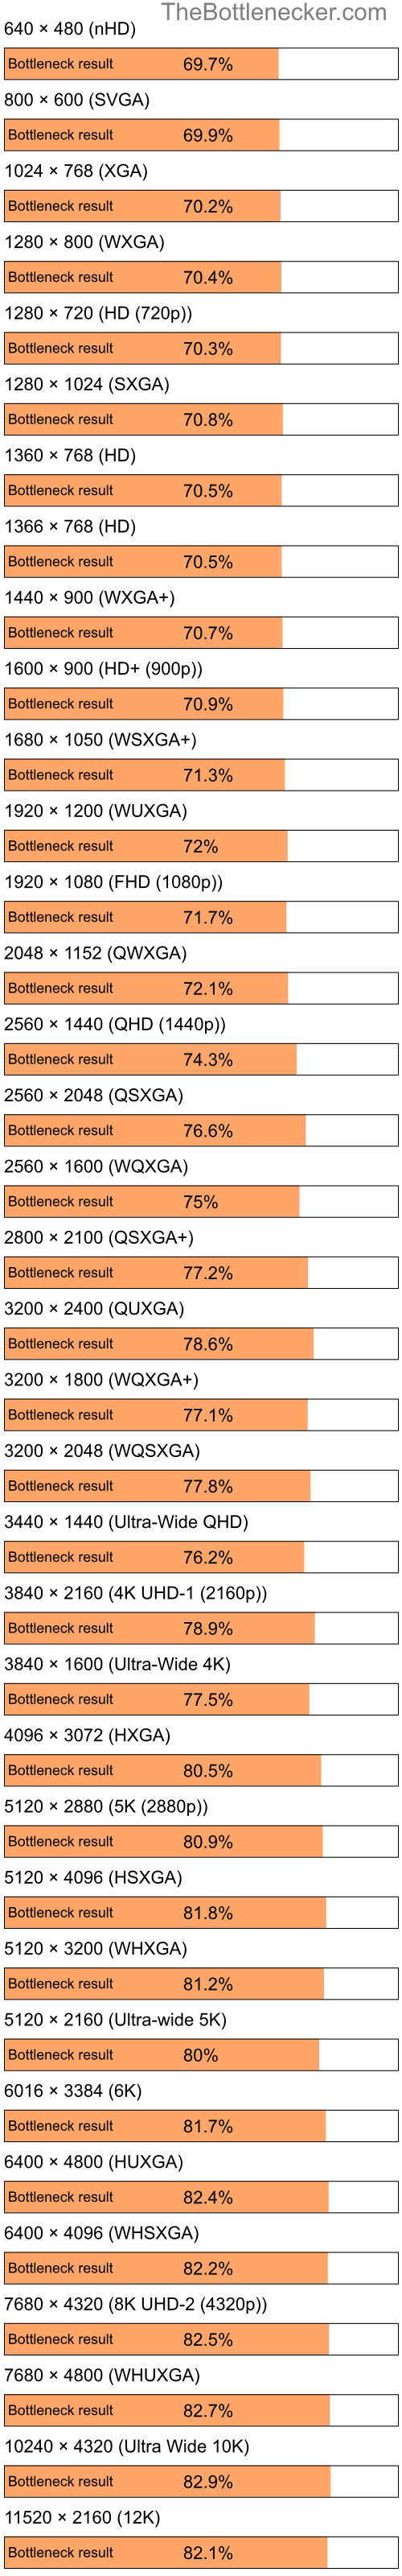 Bottleneck results by resolution for Intel Atom Z520 and AMD Radeon 3000 in Graphic Card Intense Tasks